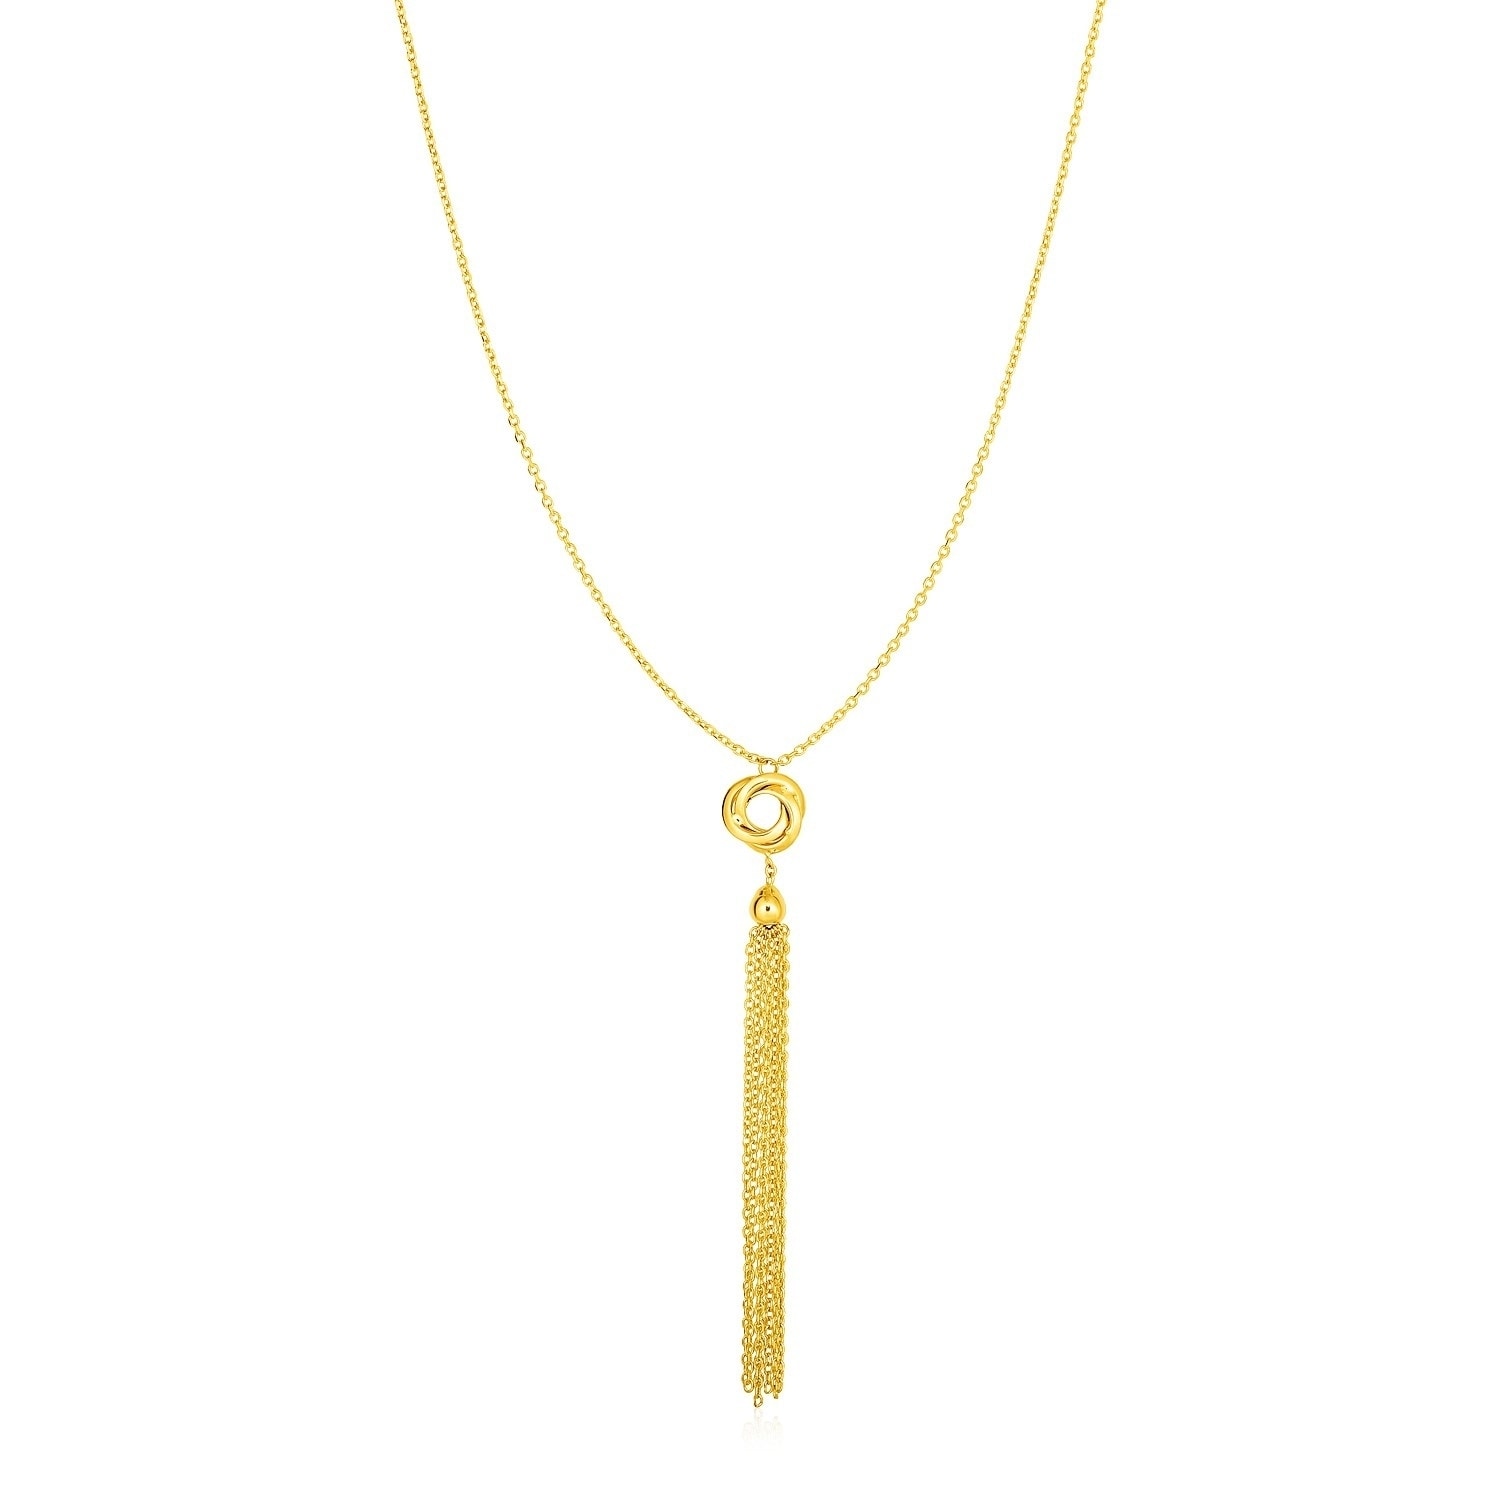 Love Knot Pendant in 14k Yellow Gold 